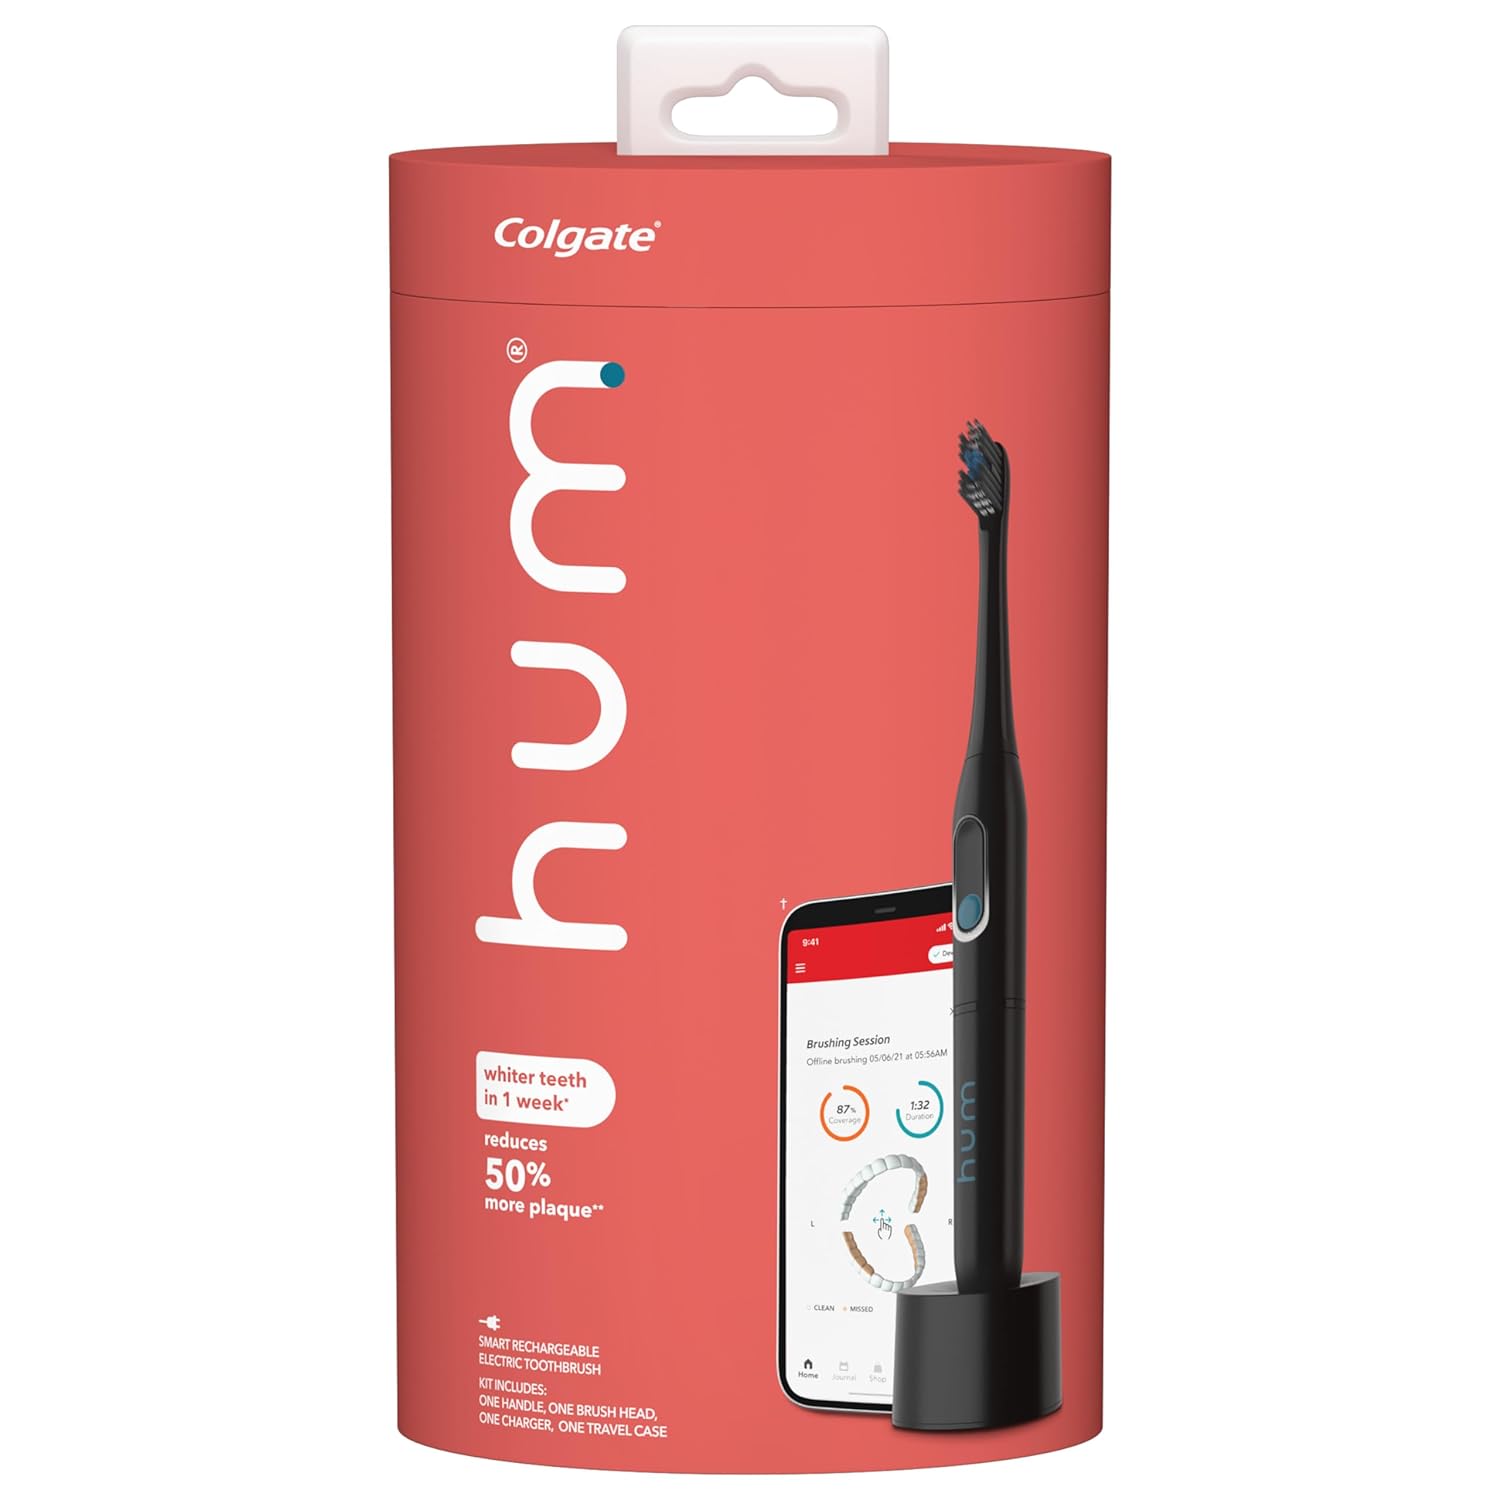 hum by Colgate Smart Rechargeable Electric Toothbrush Kit, Black, Unisex-Adults